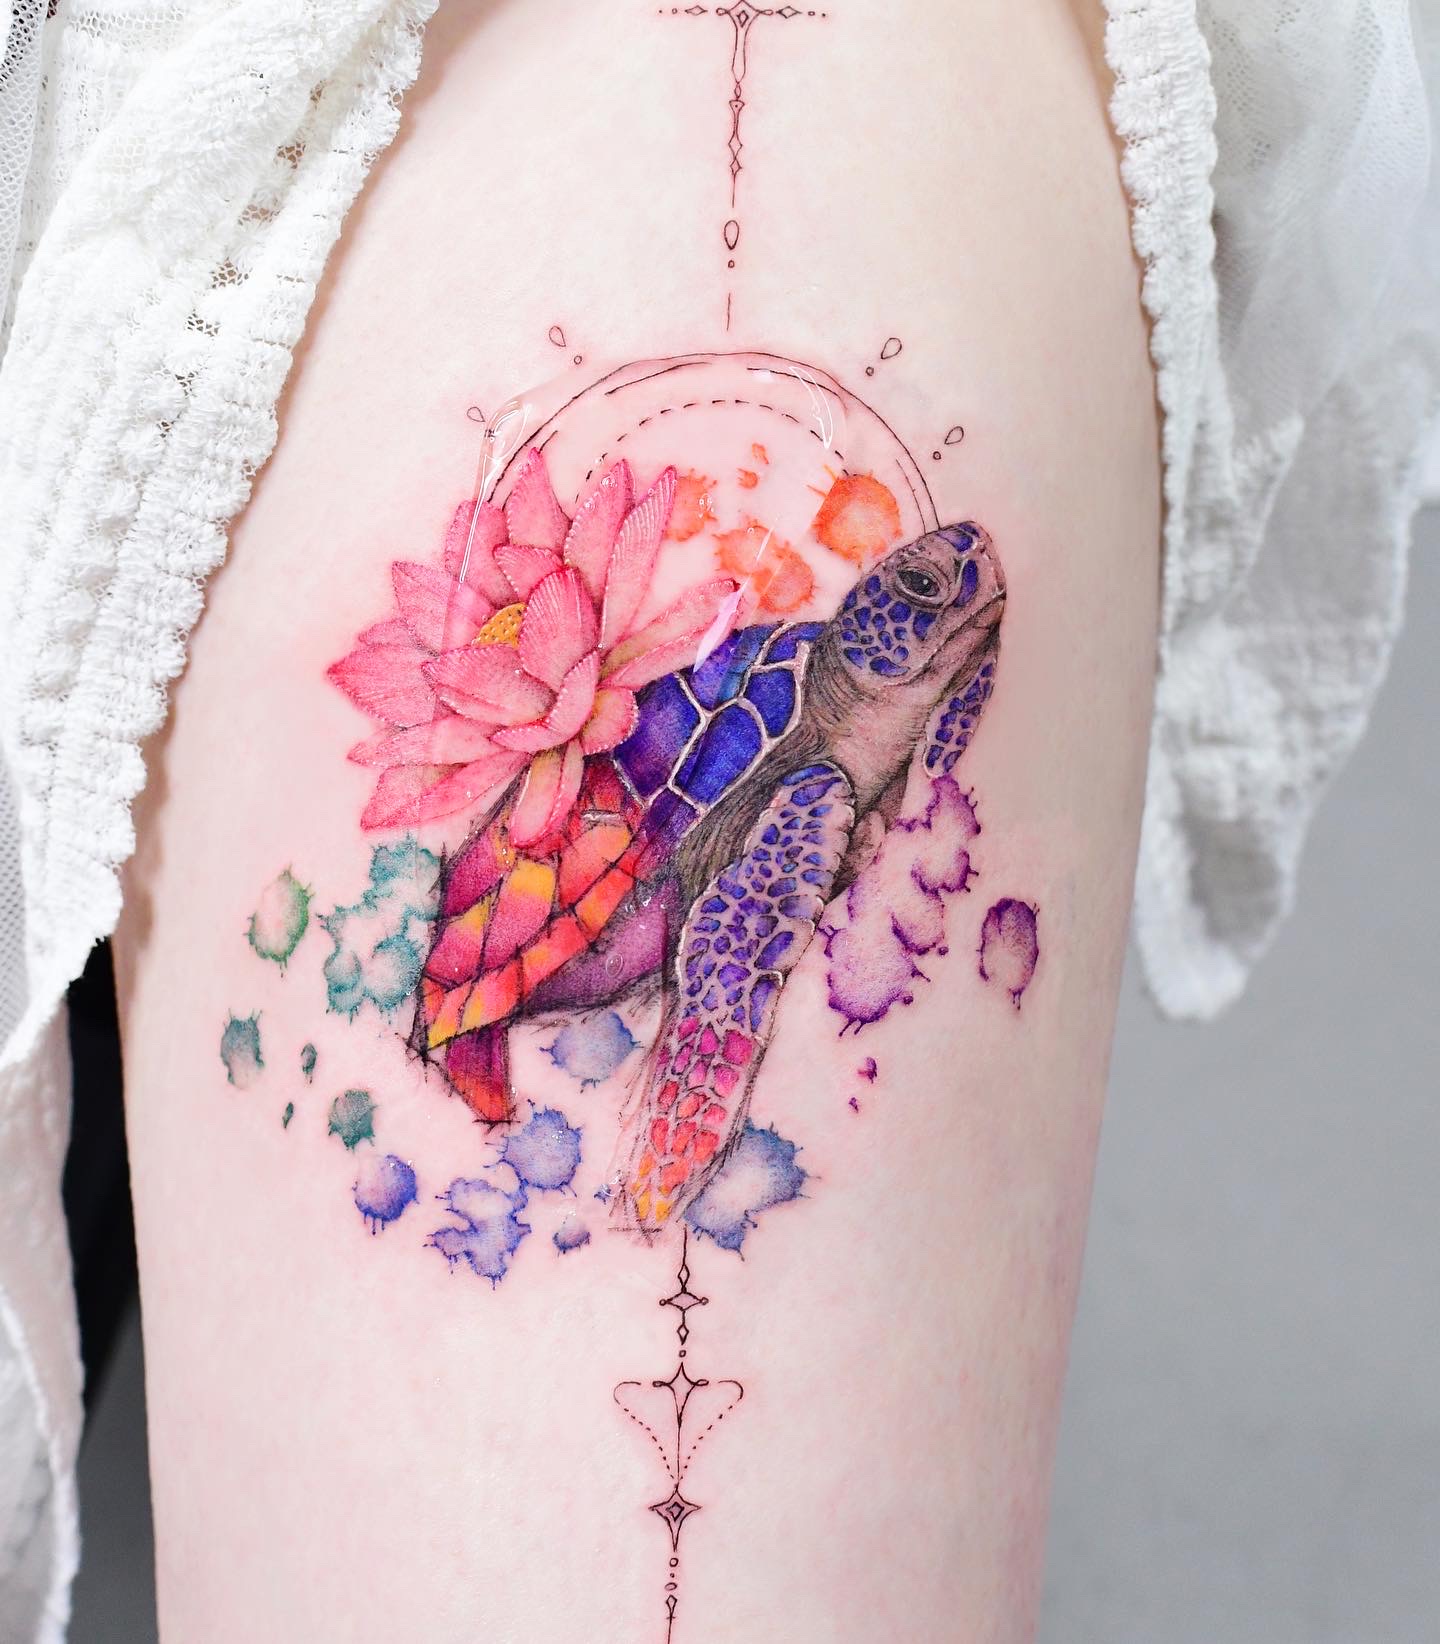 This Artist Gives People Colorful And Bright Animal Tattoos (80 Pics)  Sleeve Tattoos, Body Art Tattoos, Tattoos | Animal Whale Ocean Tattoo  Hoodie Men's -Image By Shutterstock 